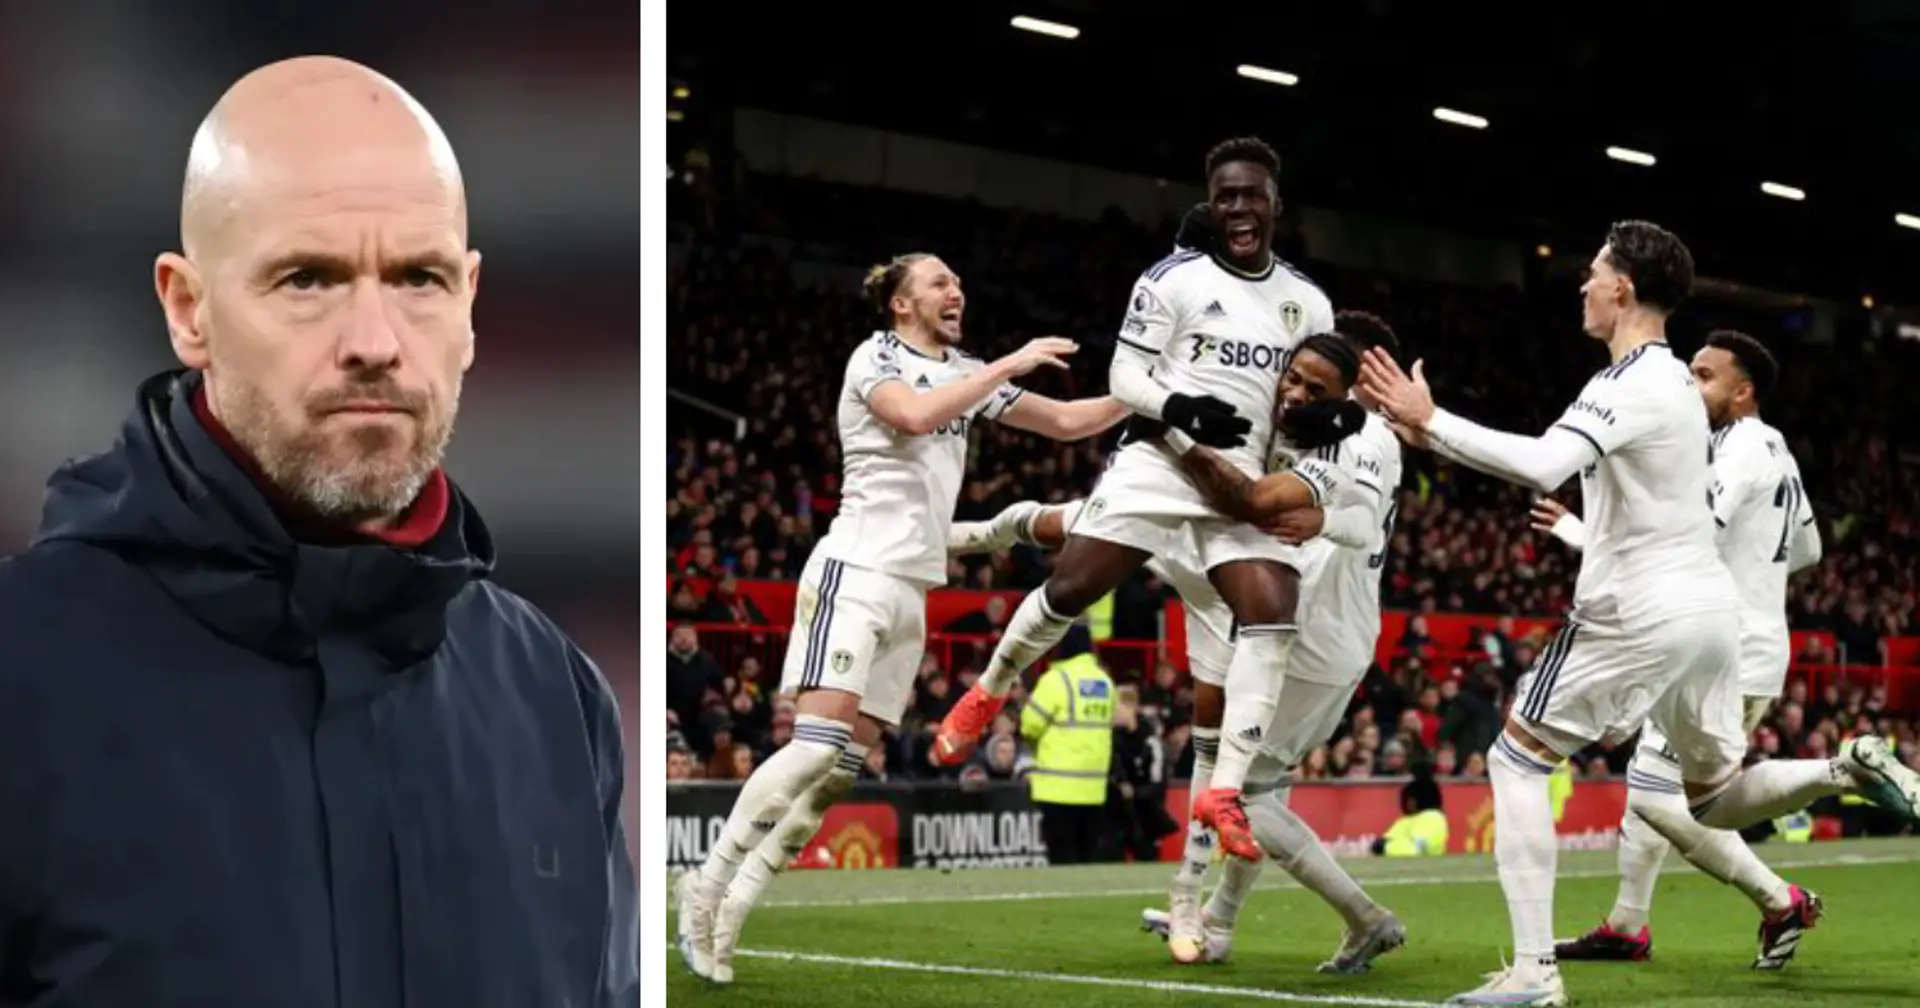 'They got off to an absolute flyer': Leeds tipped to beat Man United in return clash on Sunday